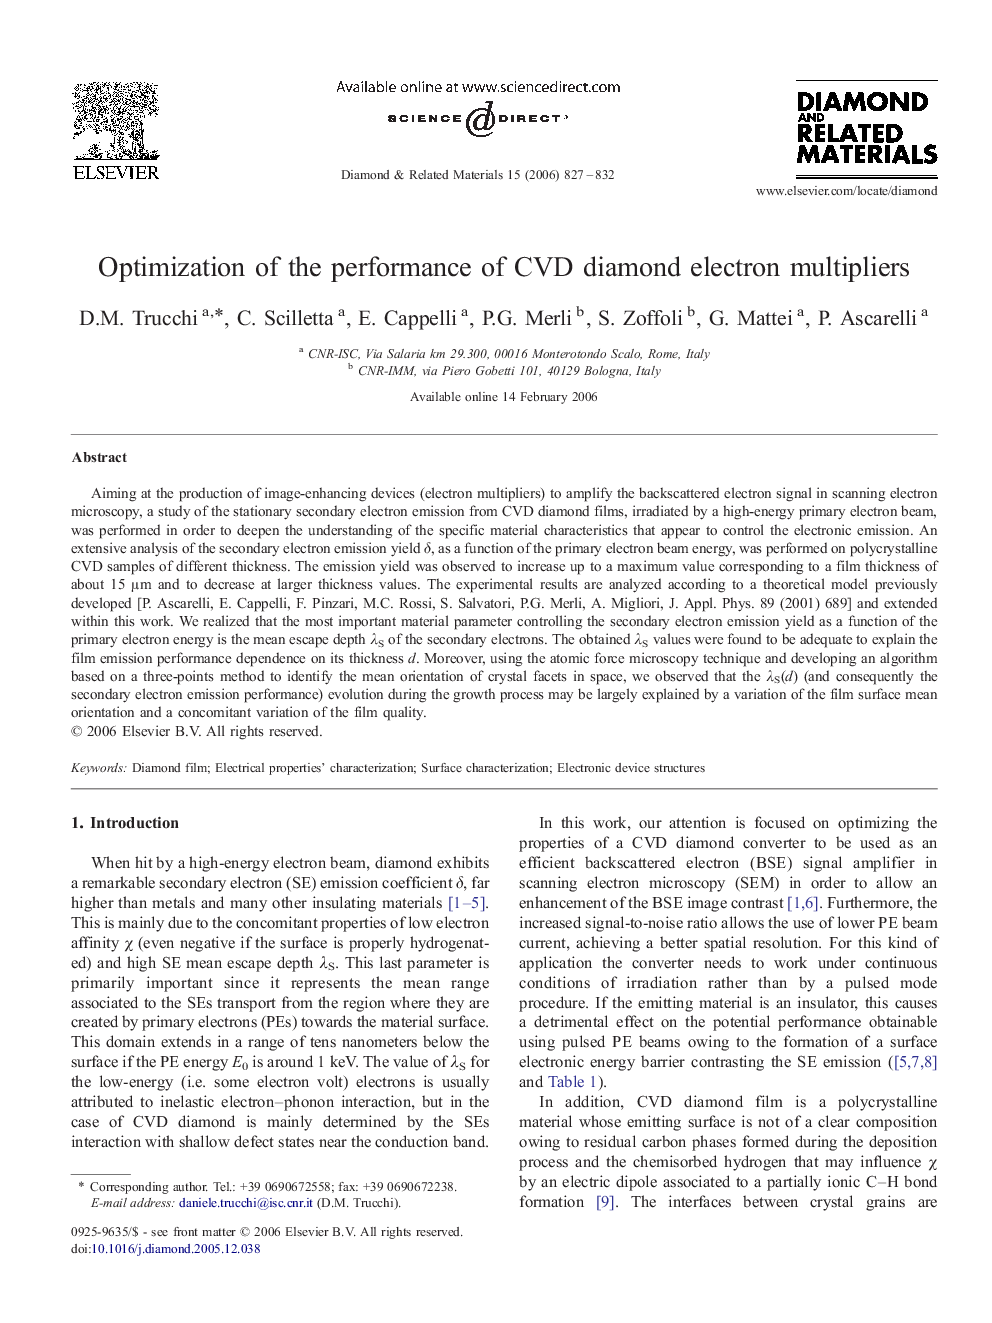 Optimization of the performance of CVD diamond electron multipliers